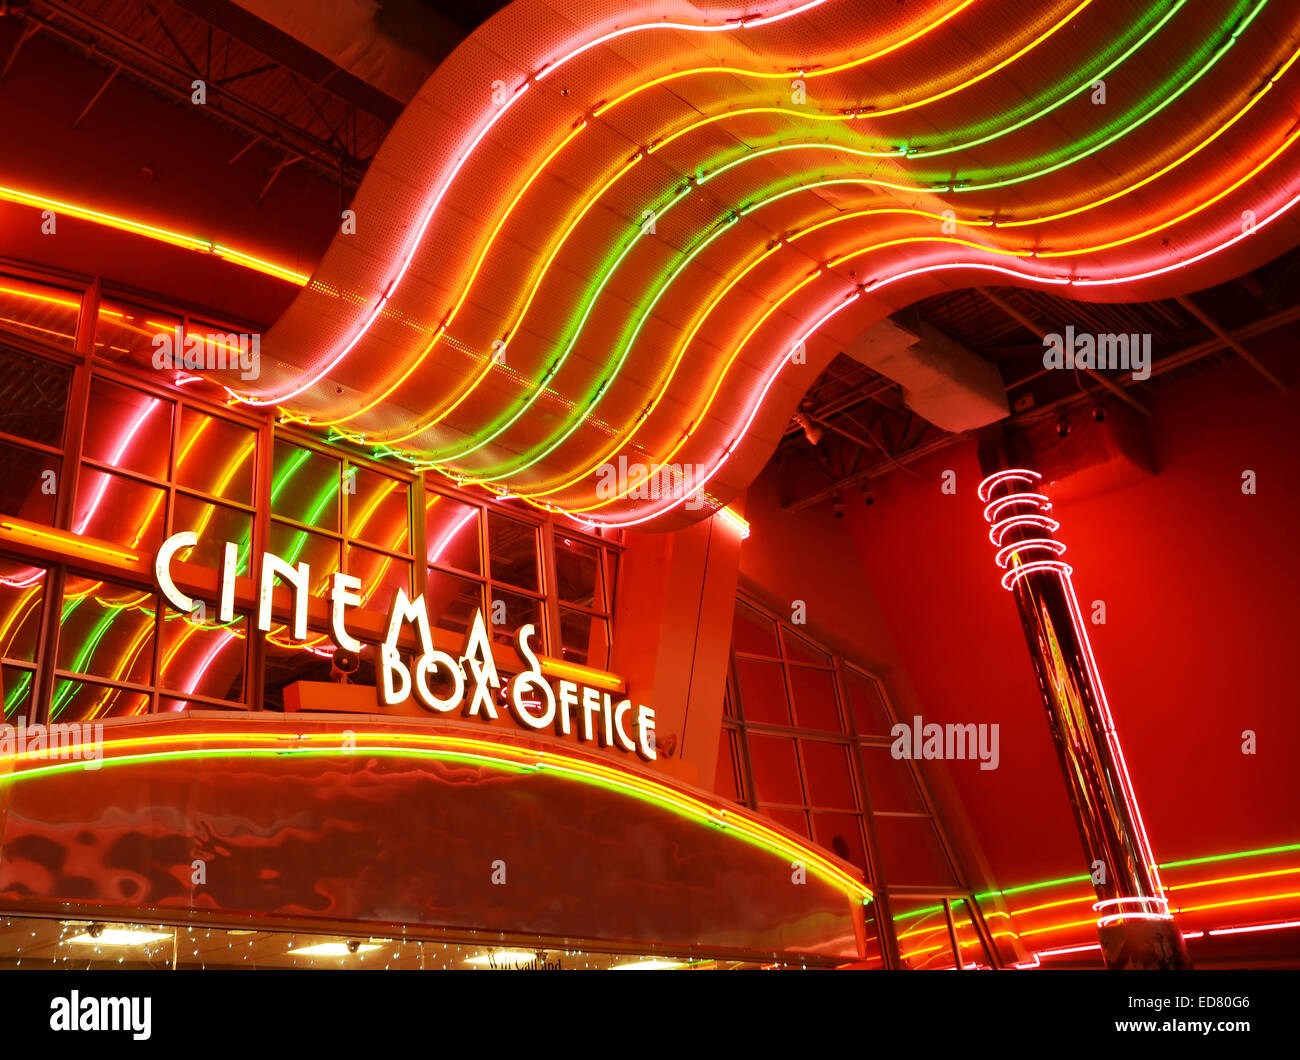 Retro glowing neon lights at movie theater box office Stock Photo